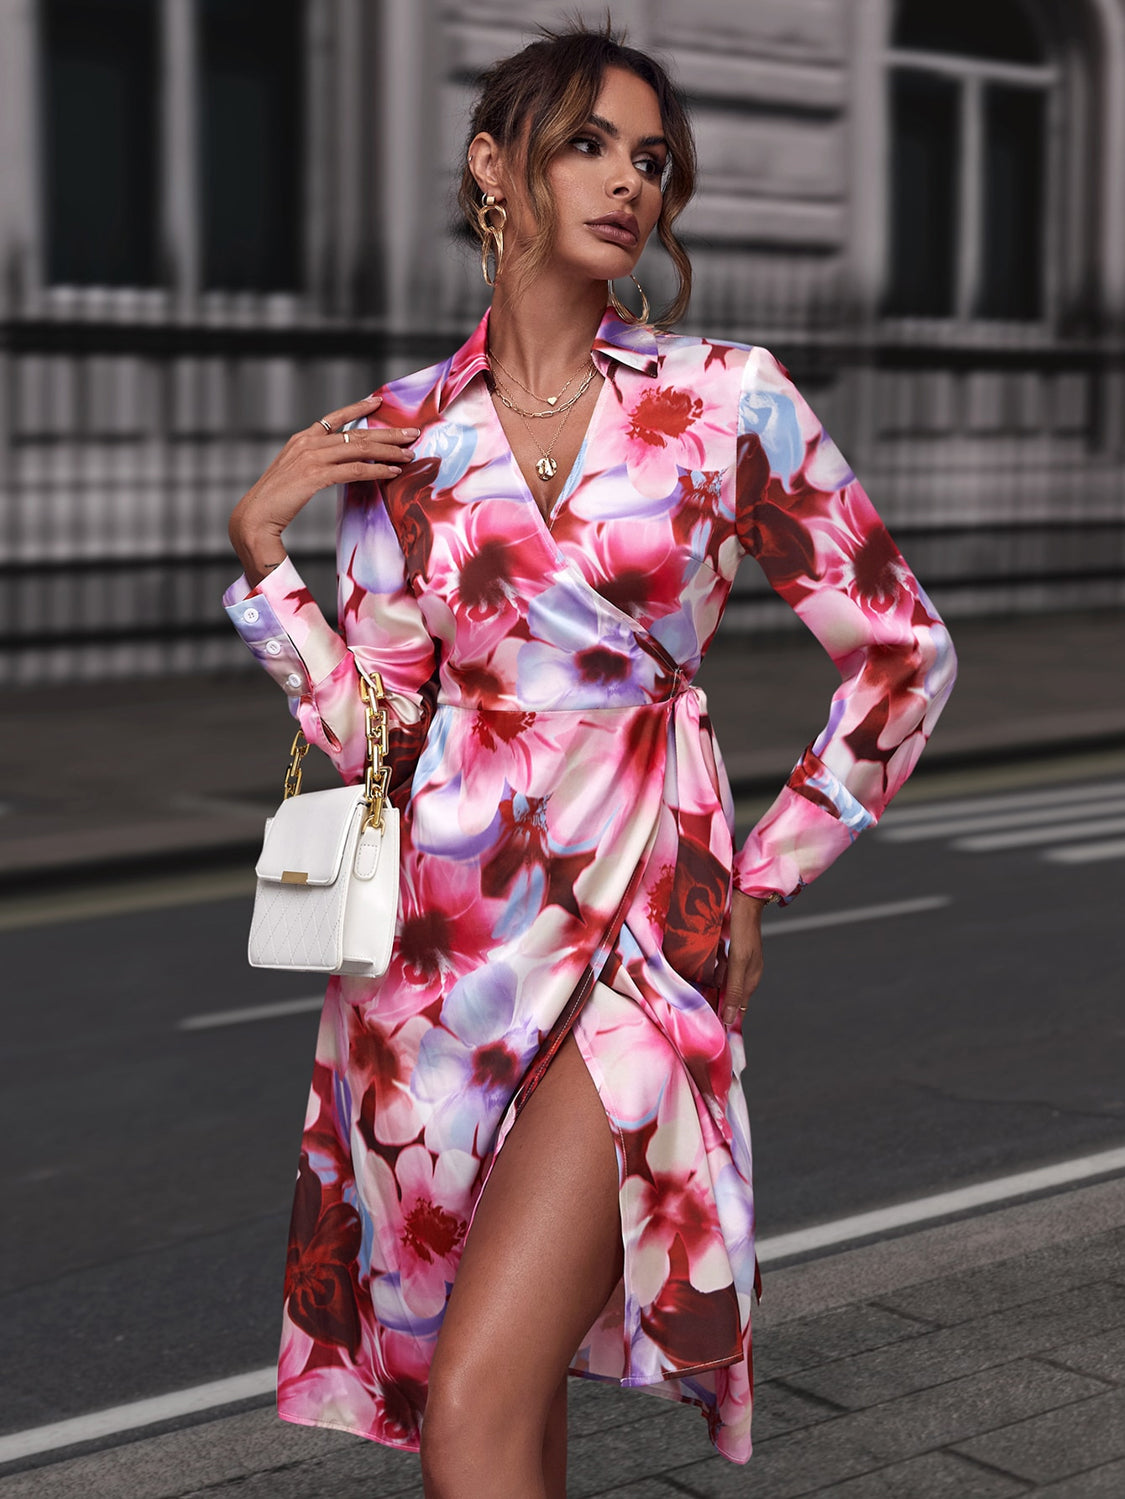 Summer Beach Wedding Guest Dress for Women - Floral Print with Collared Neck and Slit